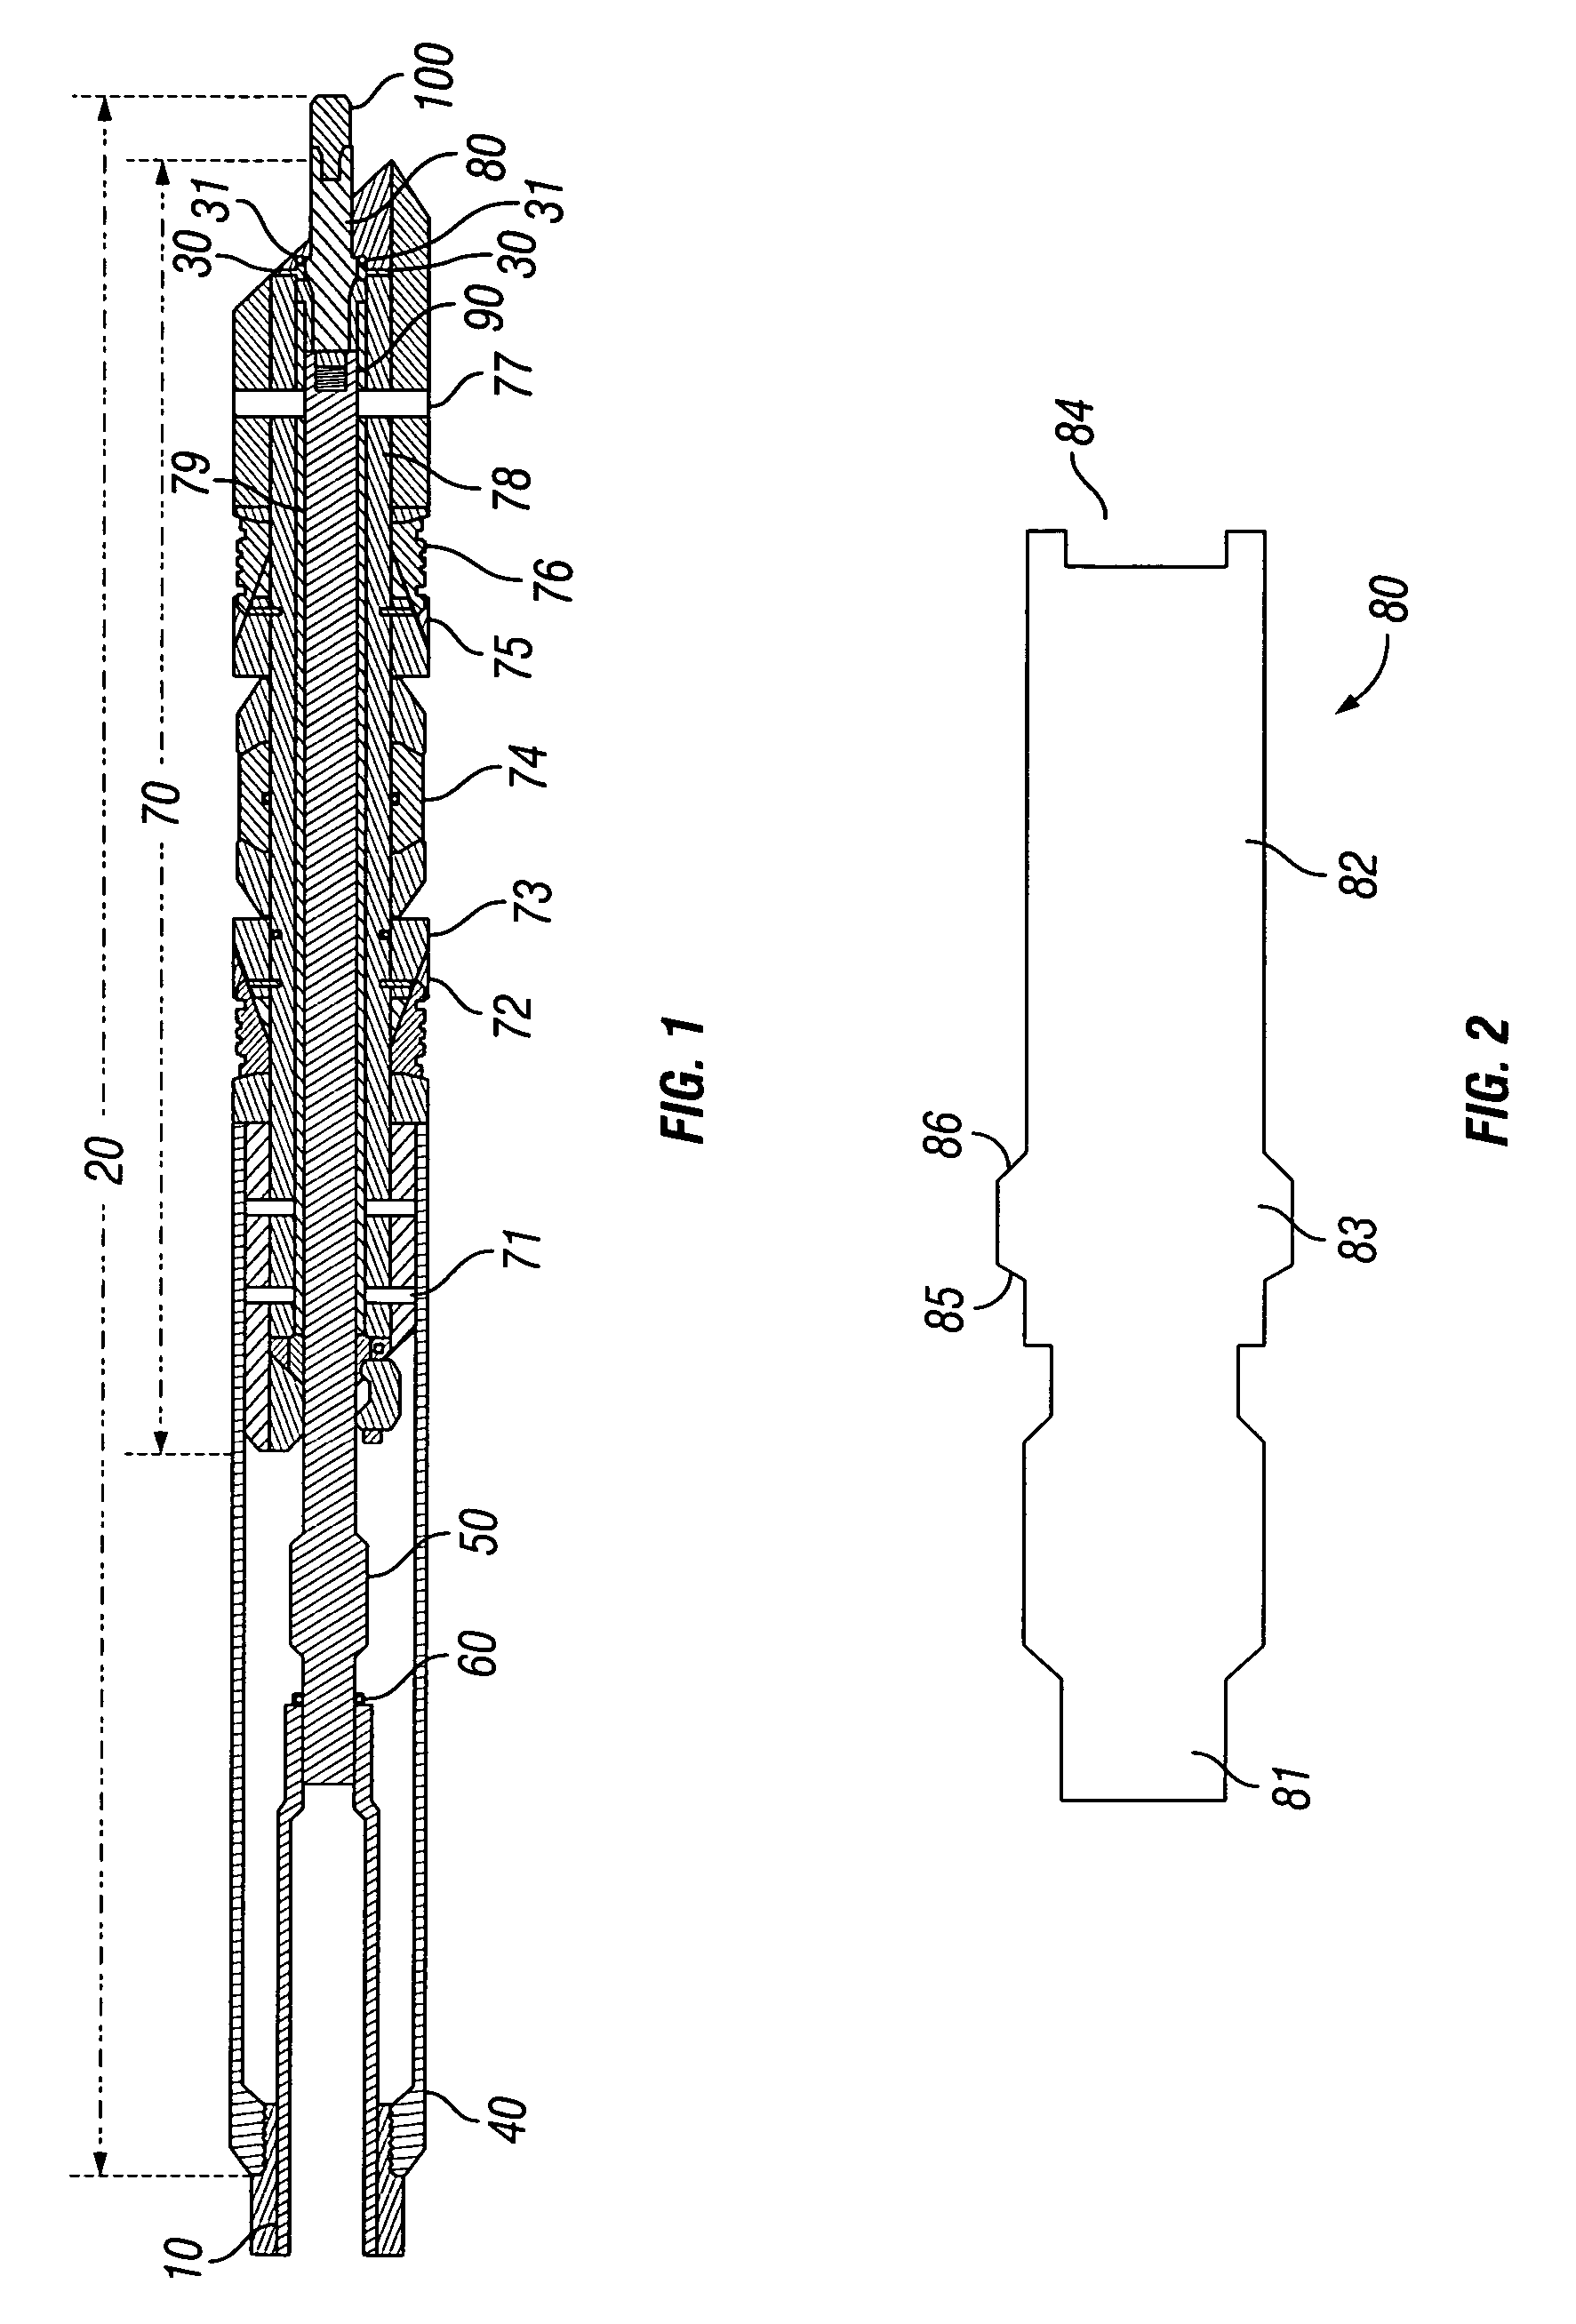 Deformable release device for use with downhole tools